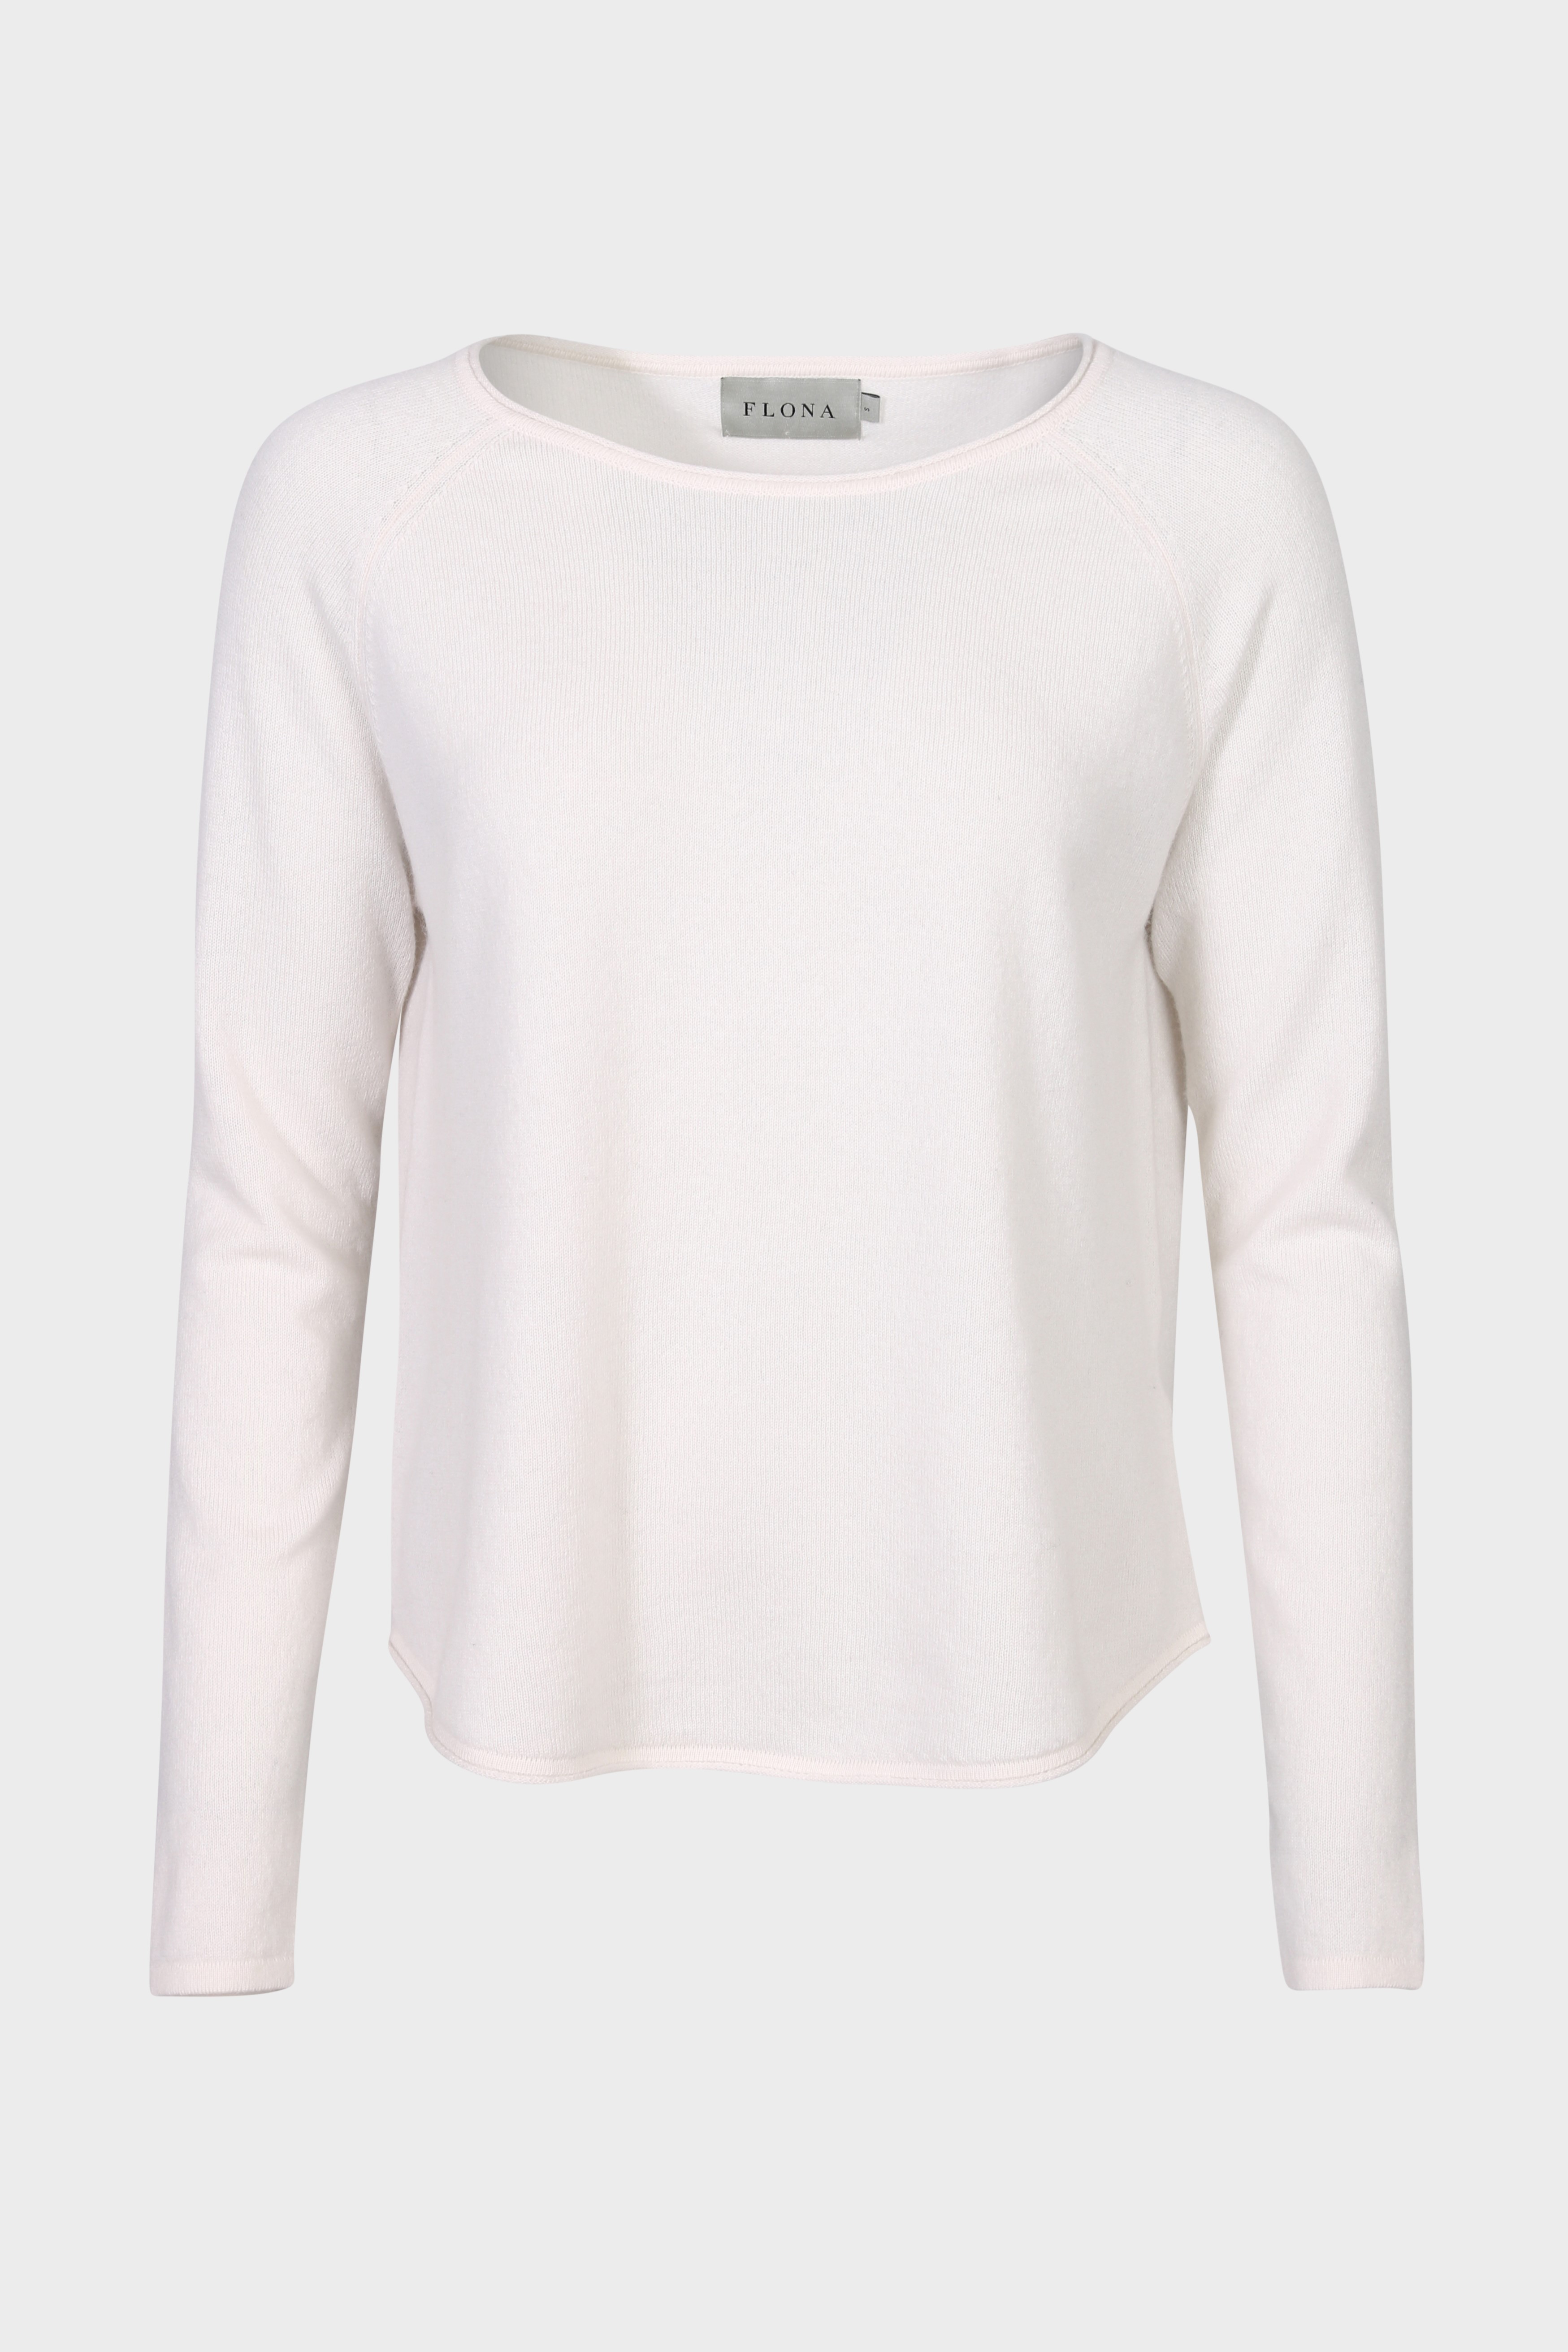 FLONA Cashmere Sweater in Offwhite